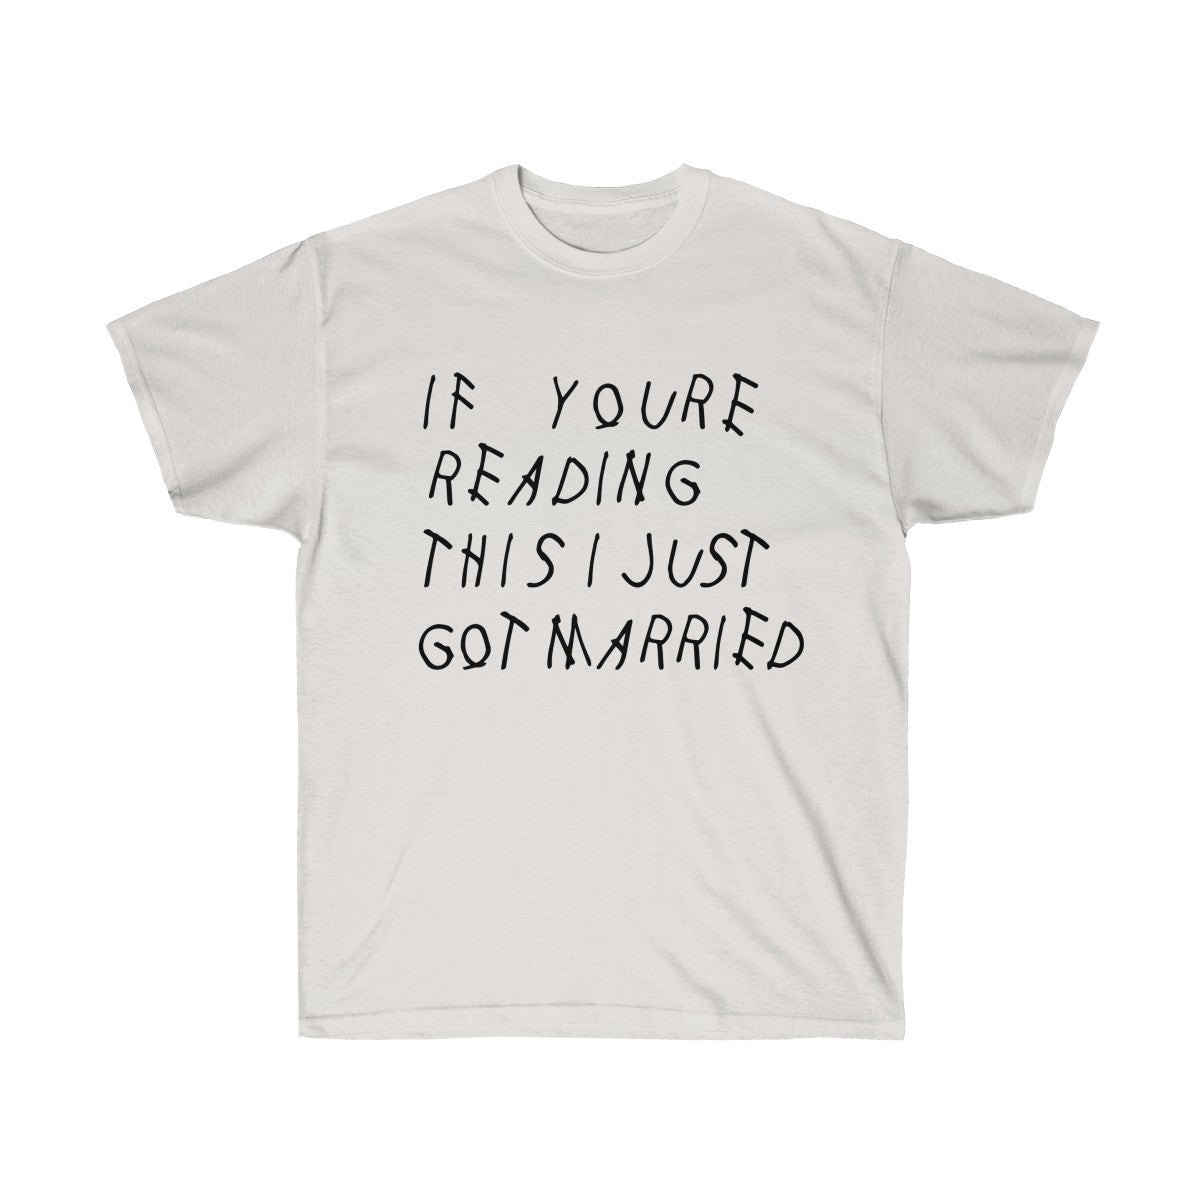 If your reading this I Just Got Married Drake inspired Unisex Ultra Cotton Tee-Ash Grey-S-Archethype